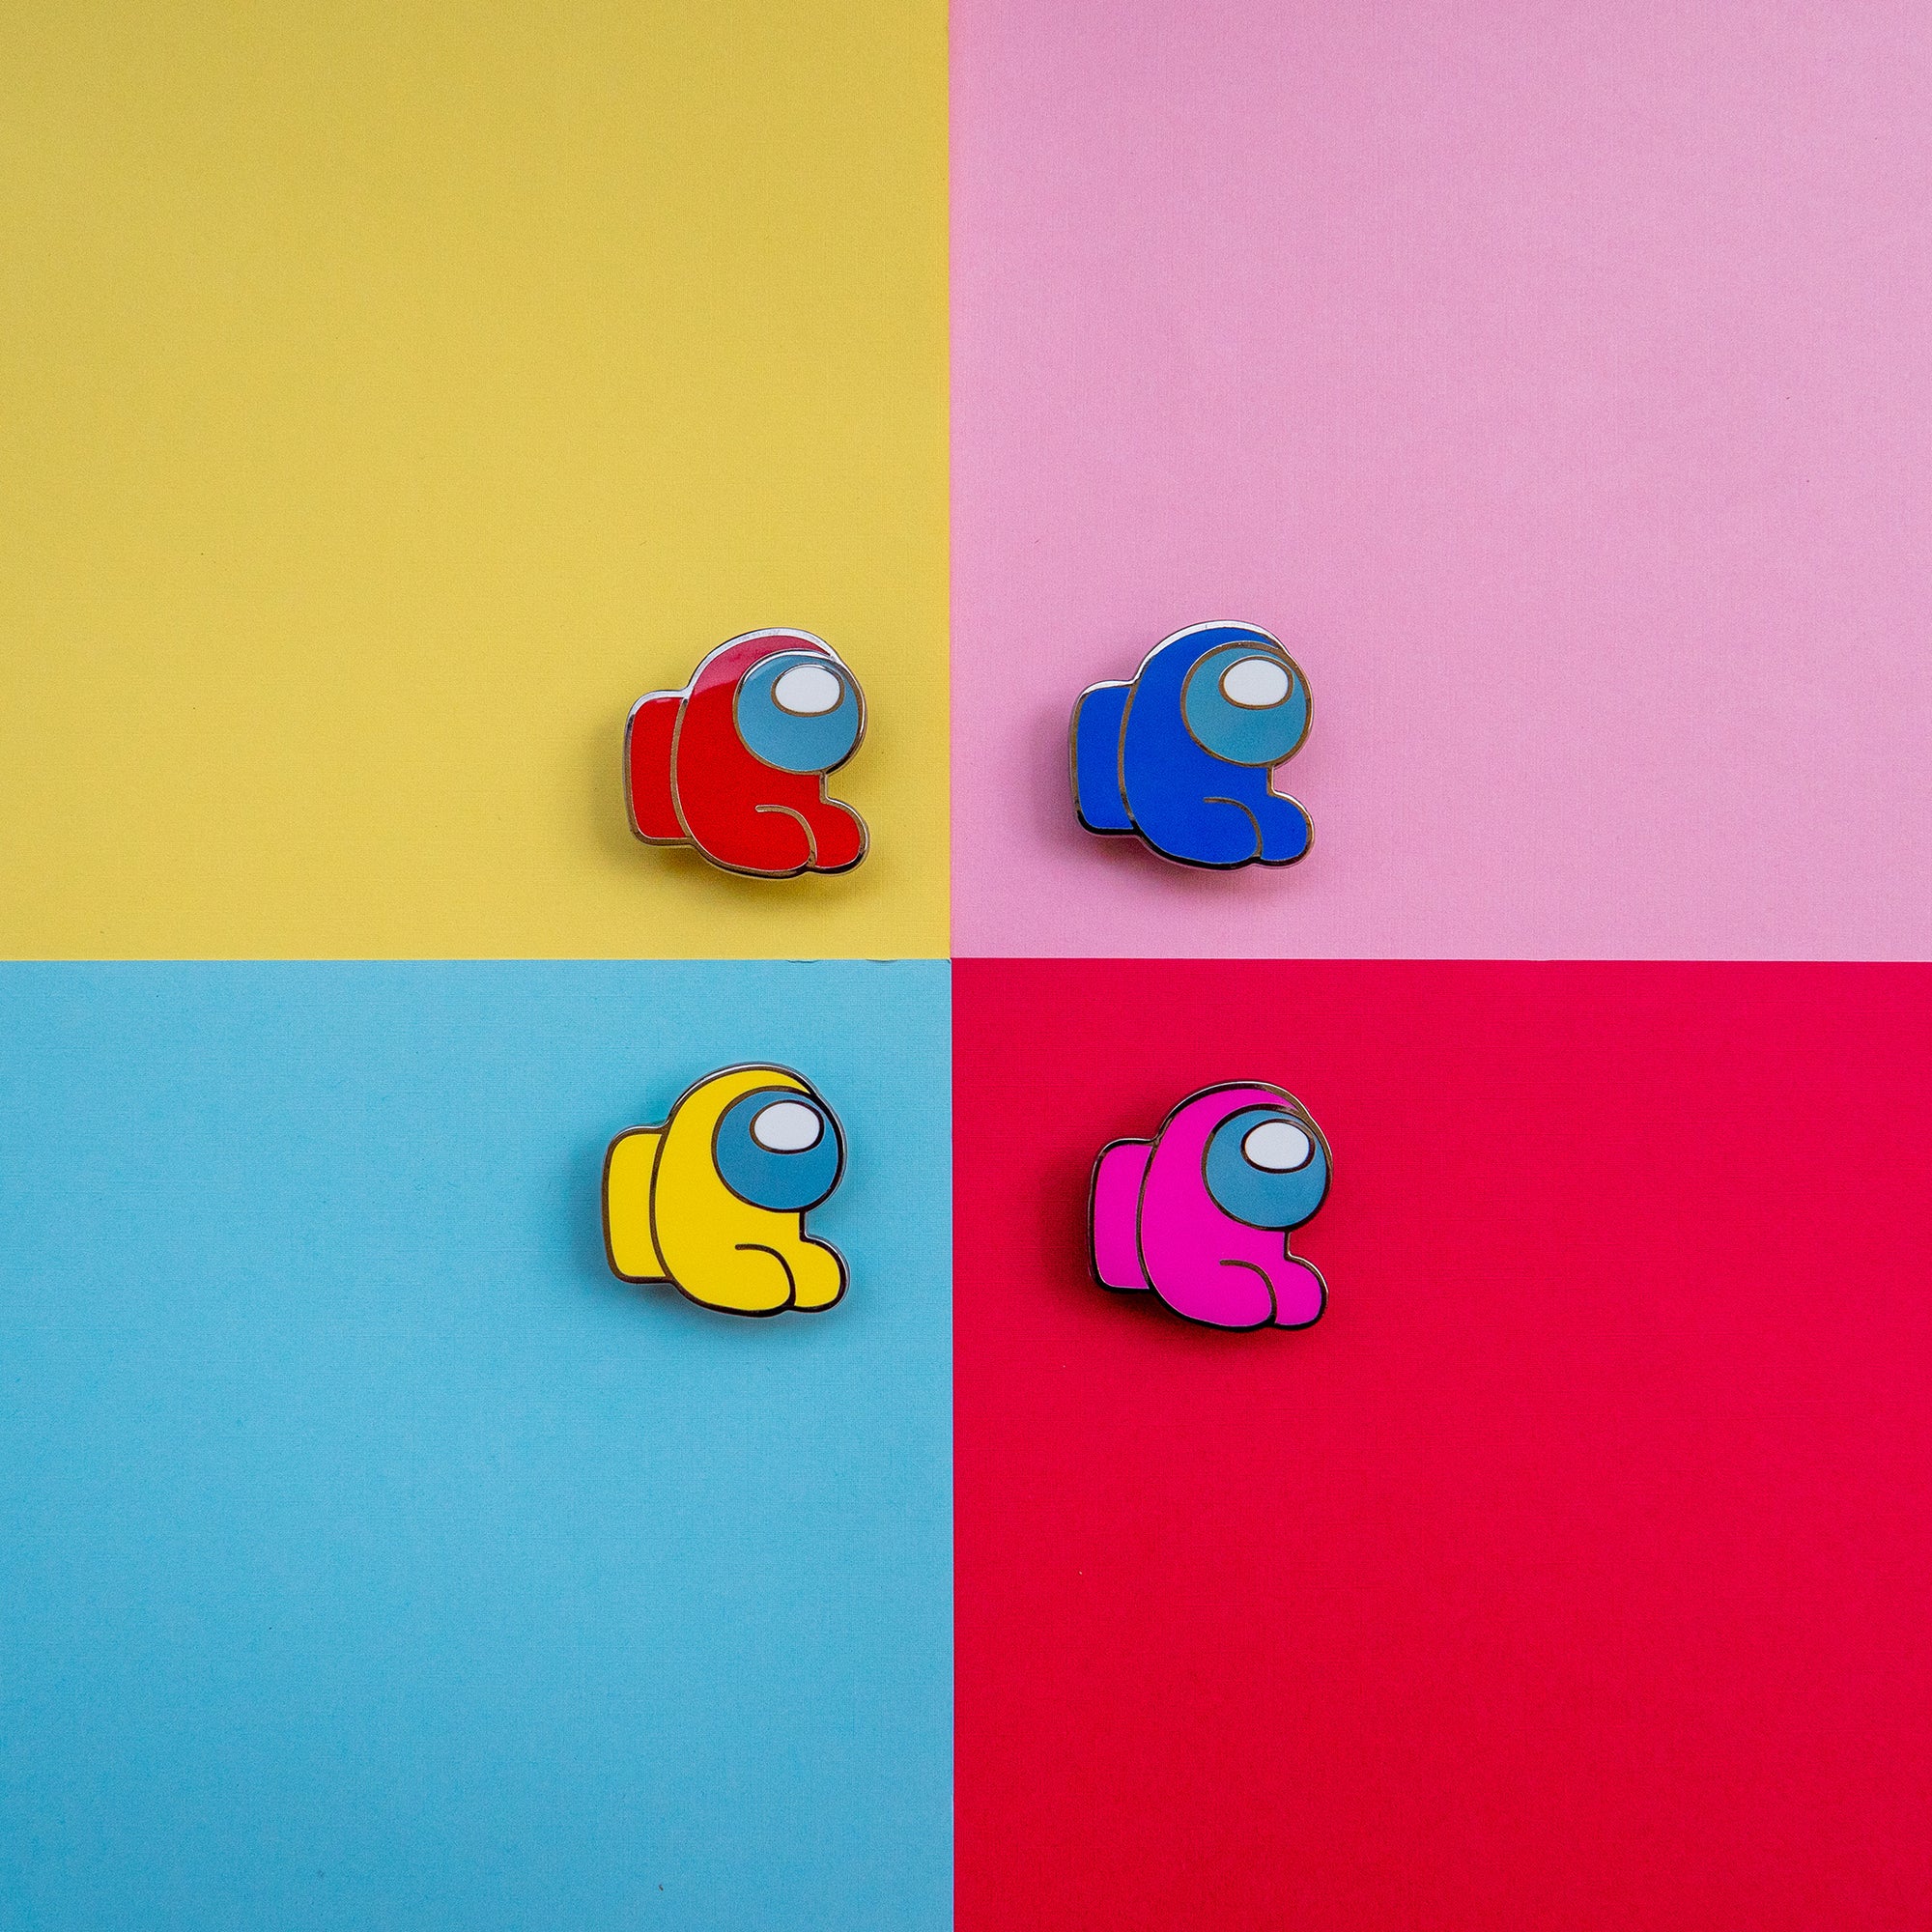 A product photograph of all four color variants of the Among Us: Mini Crewmate Enamel Pin. The Mini Crewmate pins are in a sitting position and are available in red, blue, yellow, and pink.